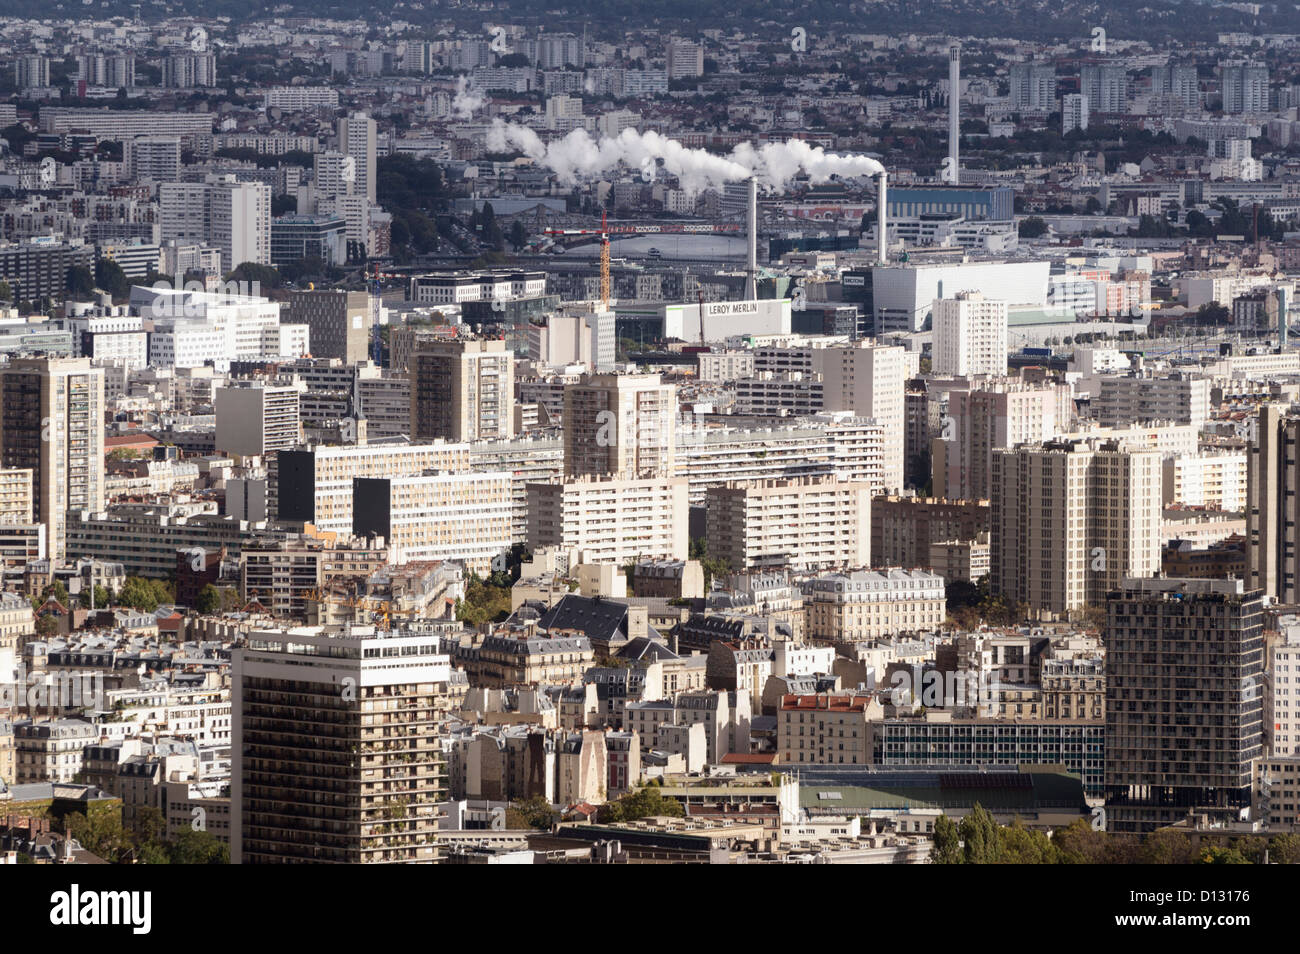 Paris - towards the 13th Arrondissement - high rise brutalist residential architecture - incinerator chimney in the distance Stock Photo